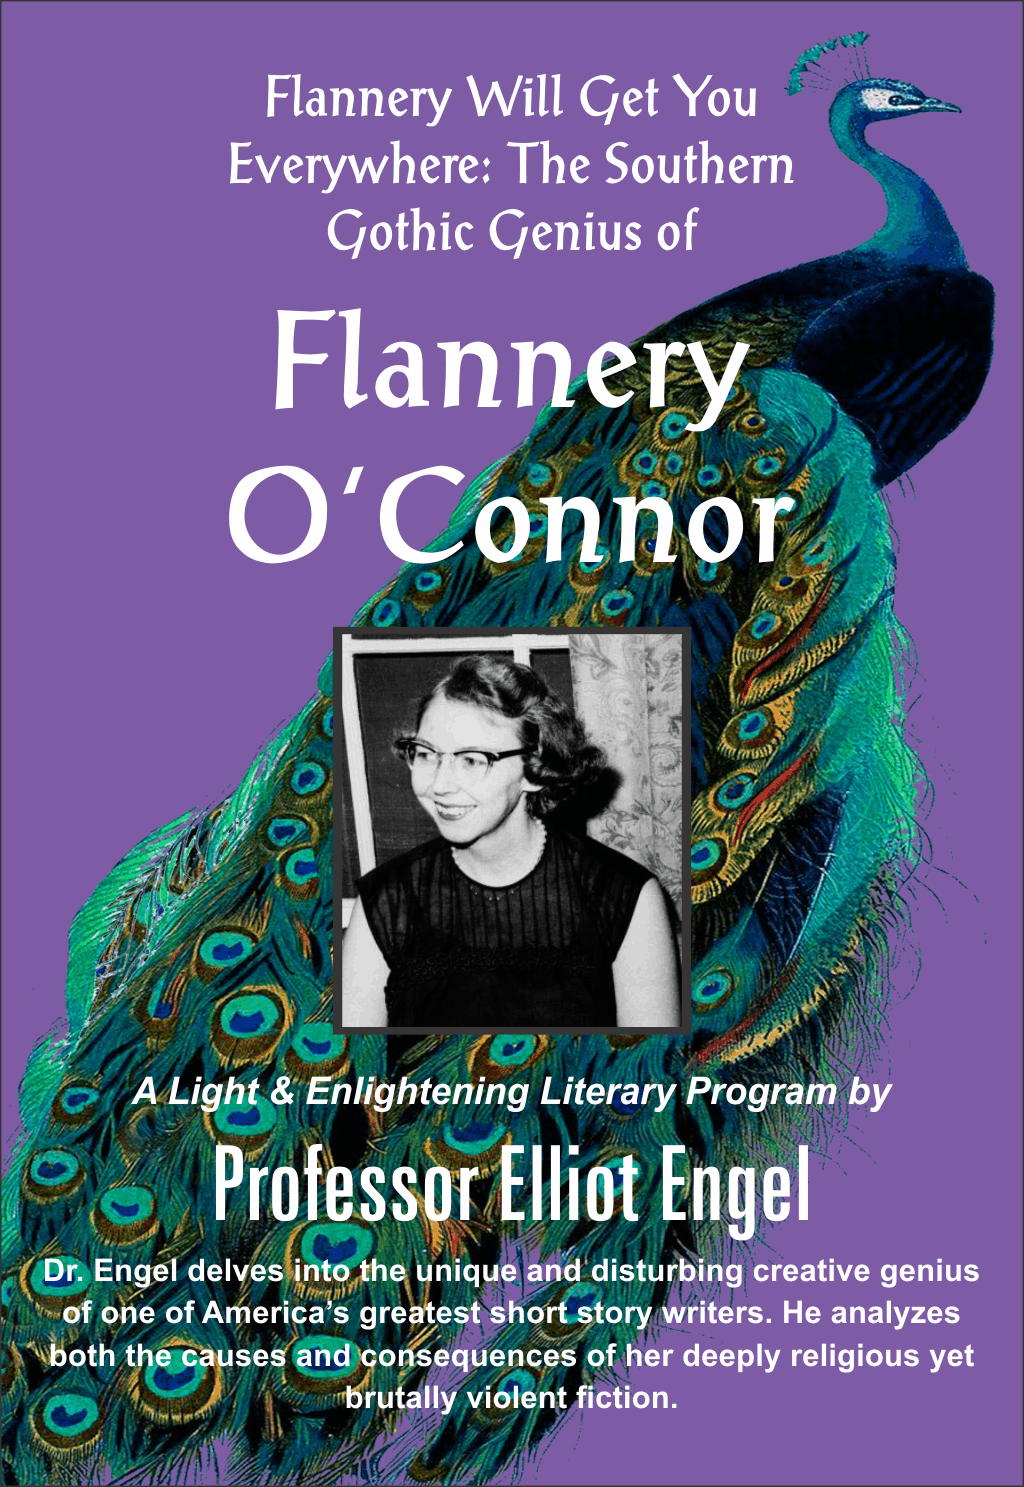 Audio Program 101 Flannery Will Get You Everywhere: The Southern Gothic Genius of Flannery O'Connor